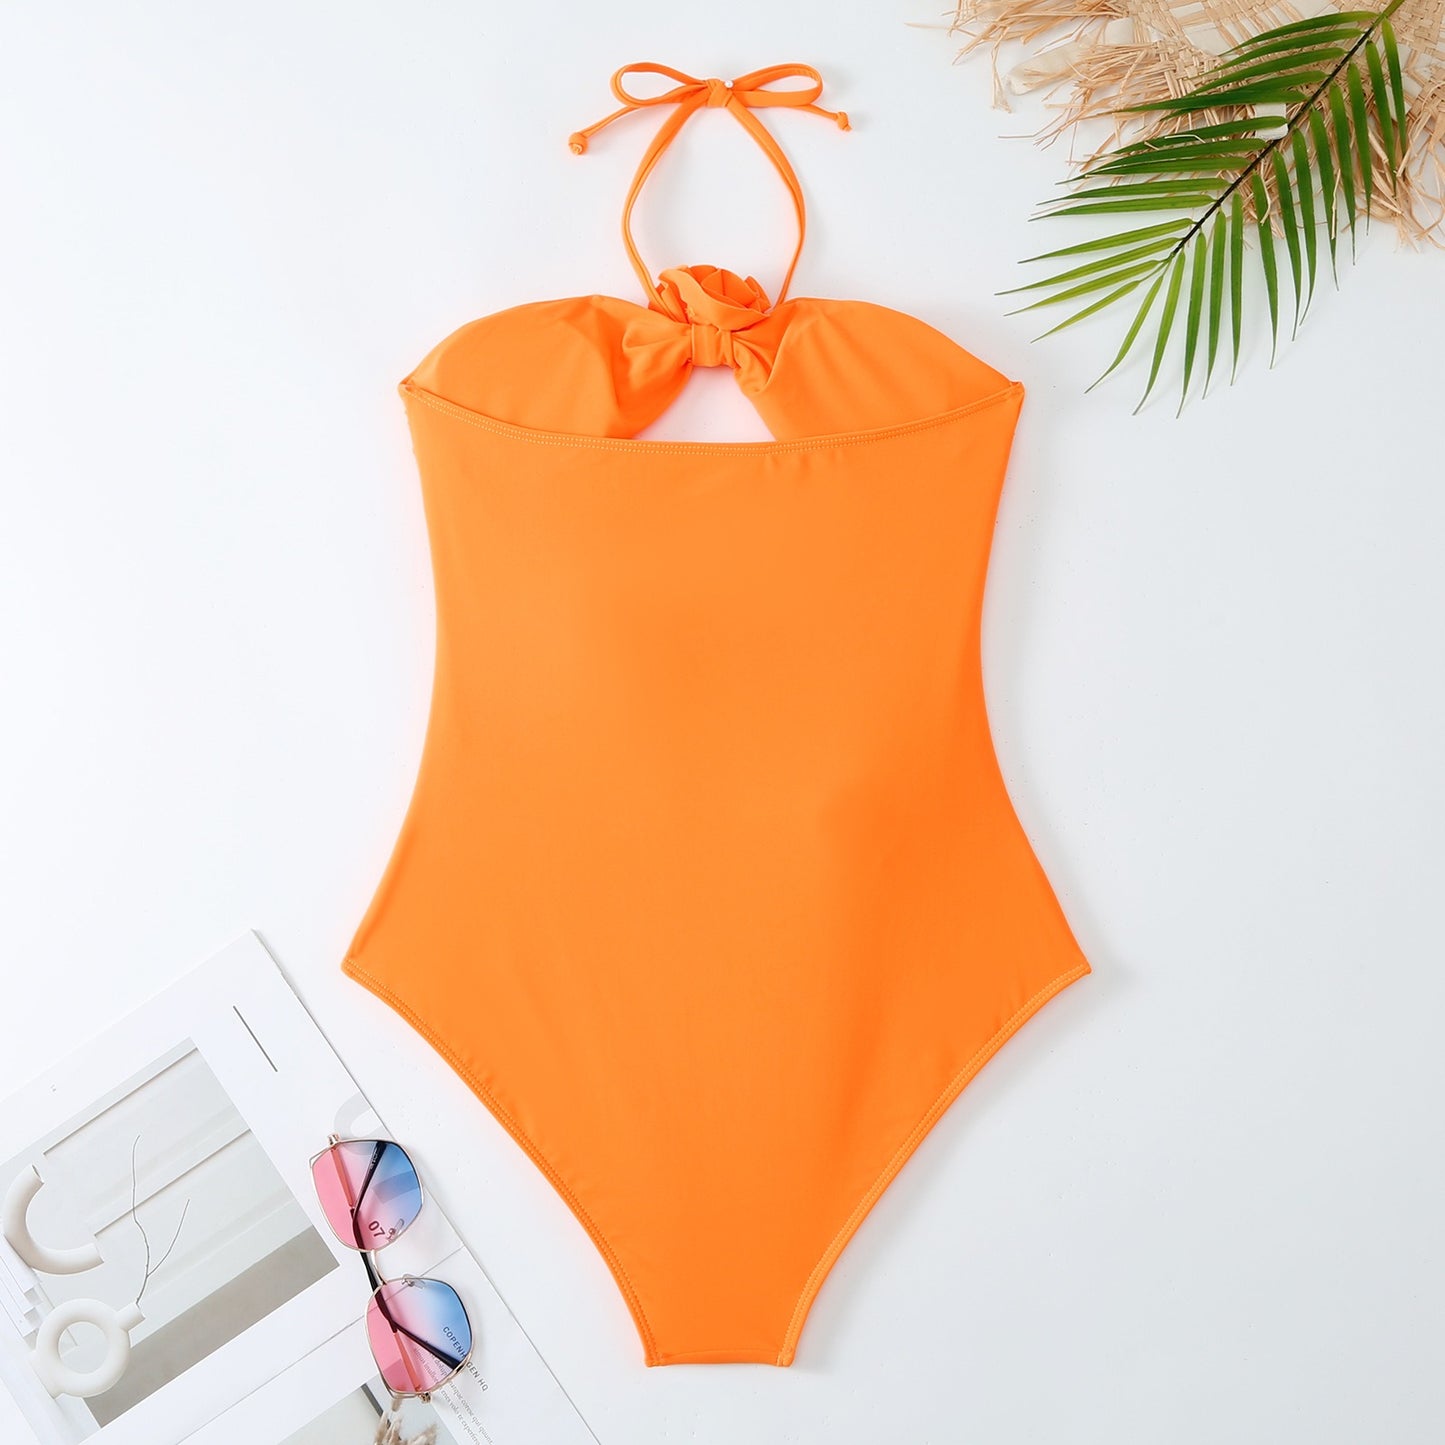 European and American One-Piece Conservative Belly Covering and Slimming Sexy Skirt Style New Swimsuit Women's Chiffon Beach Ski